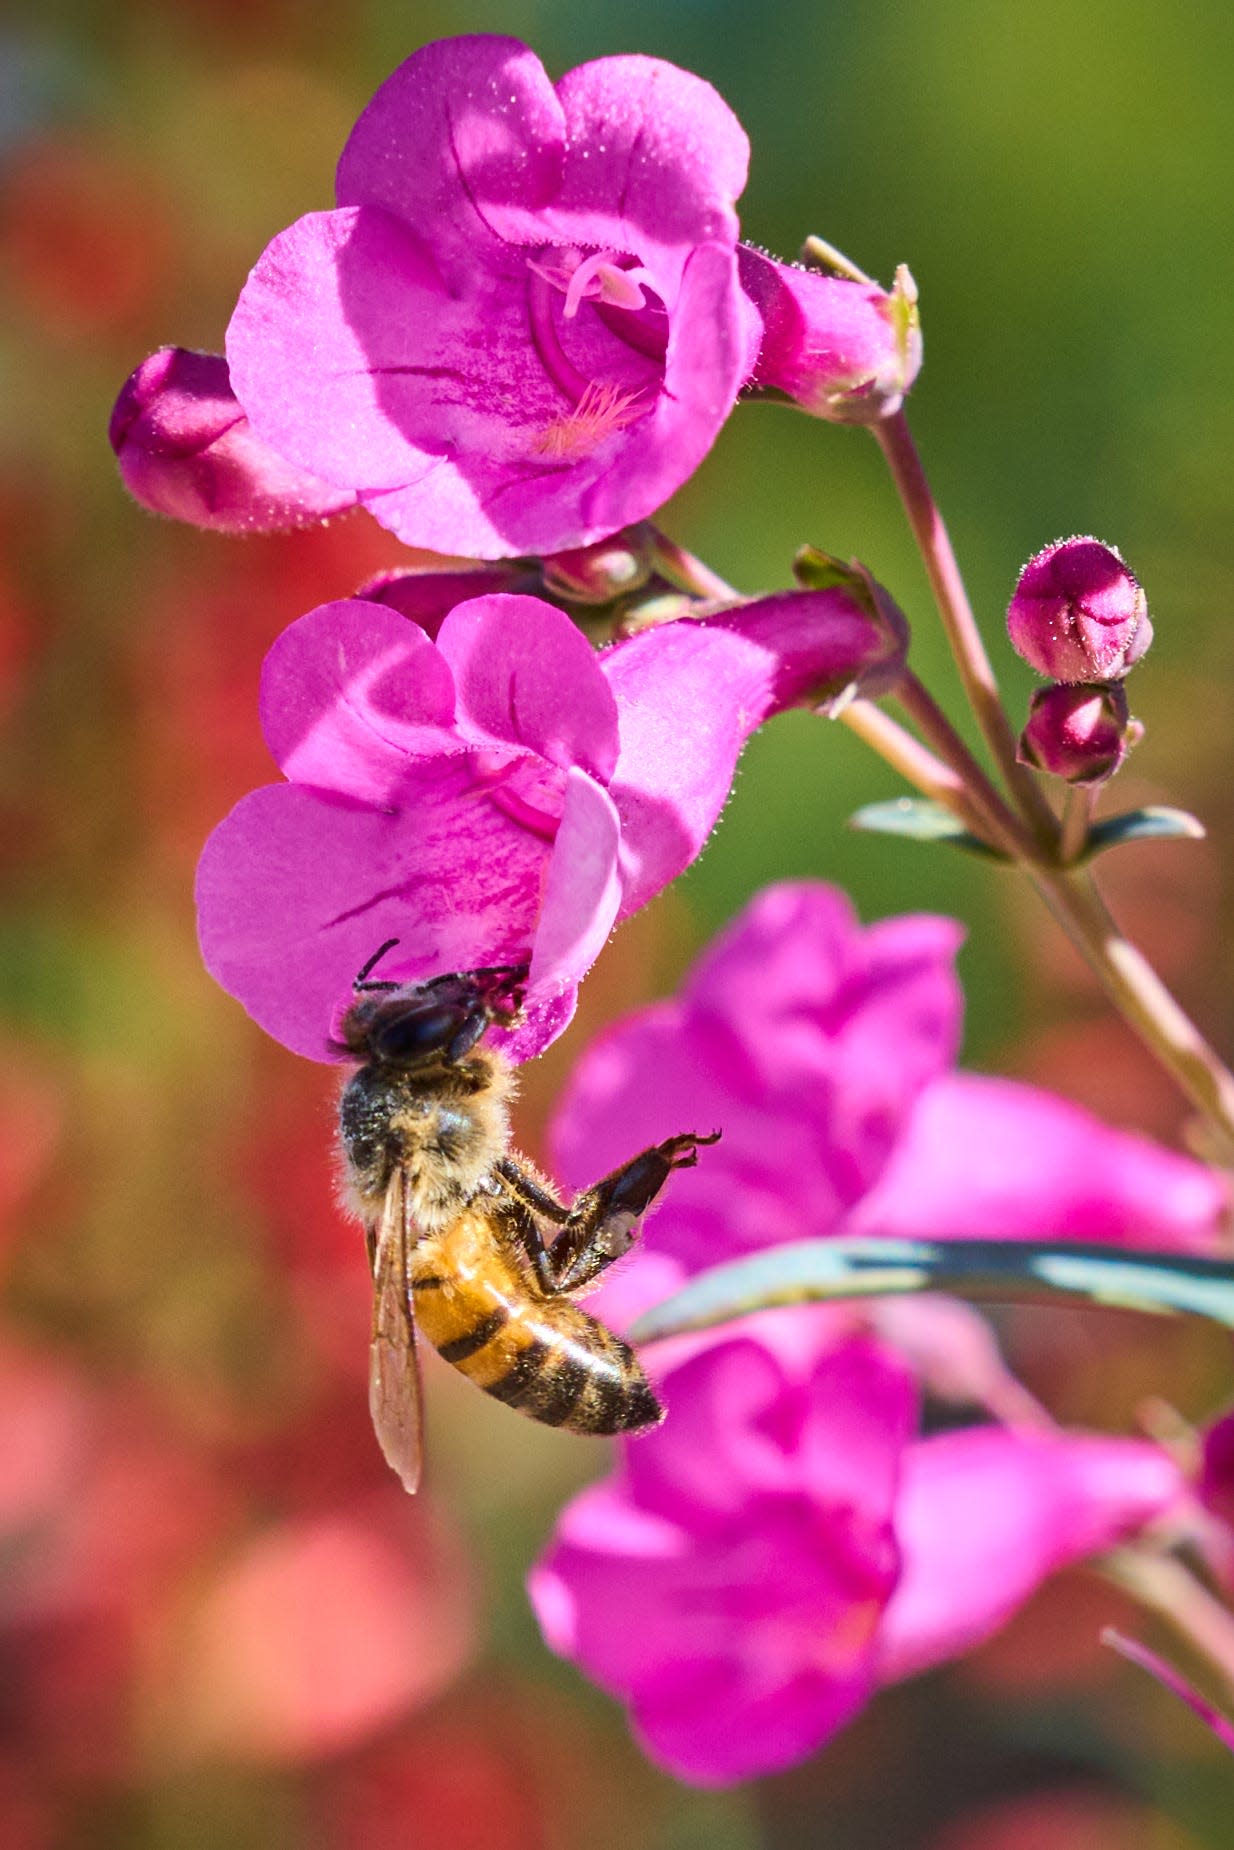 Penstemon flowers are tubular shaped, and great for attracting bees and butterflies.